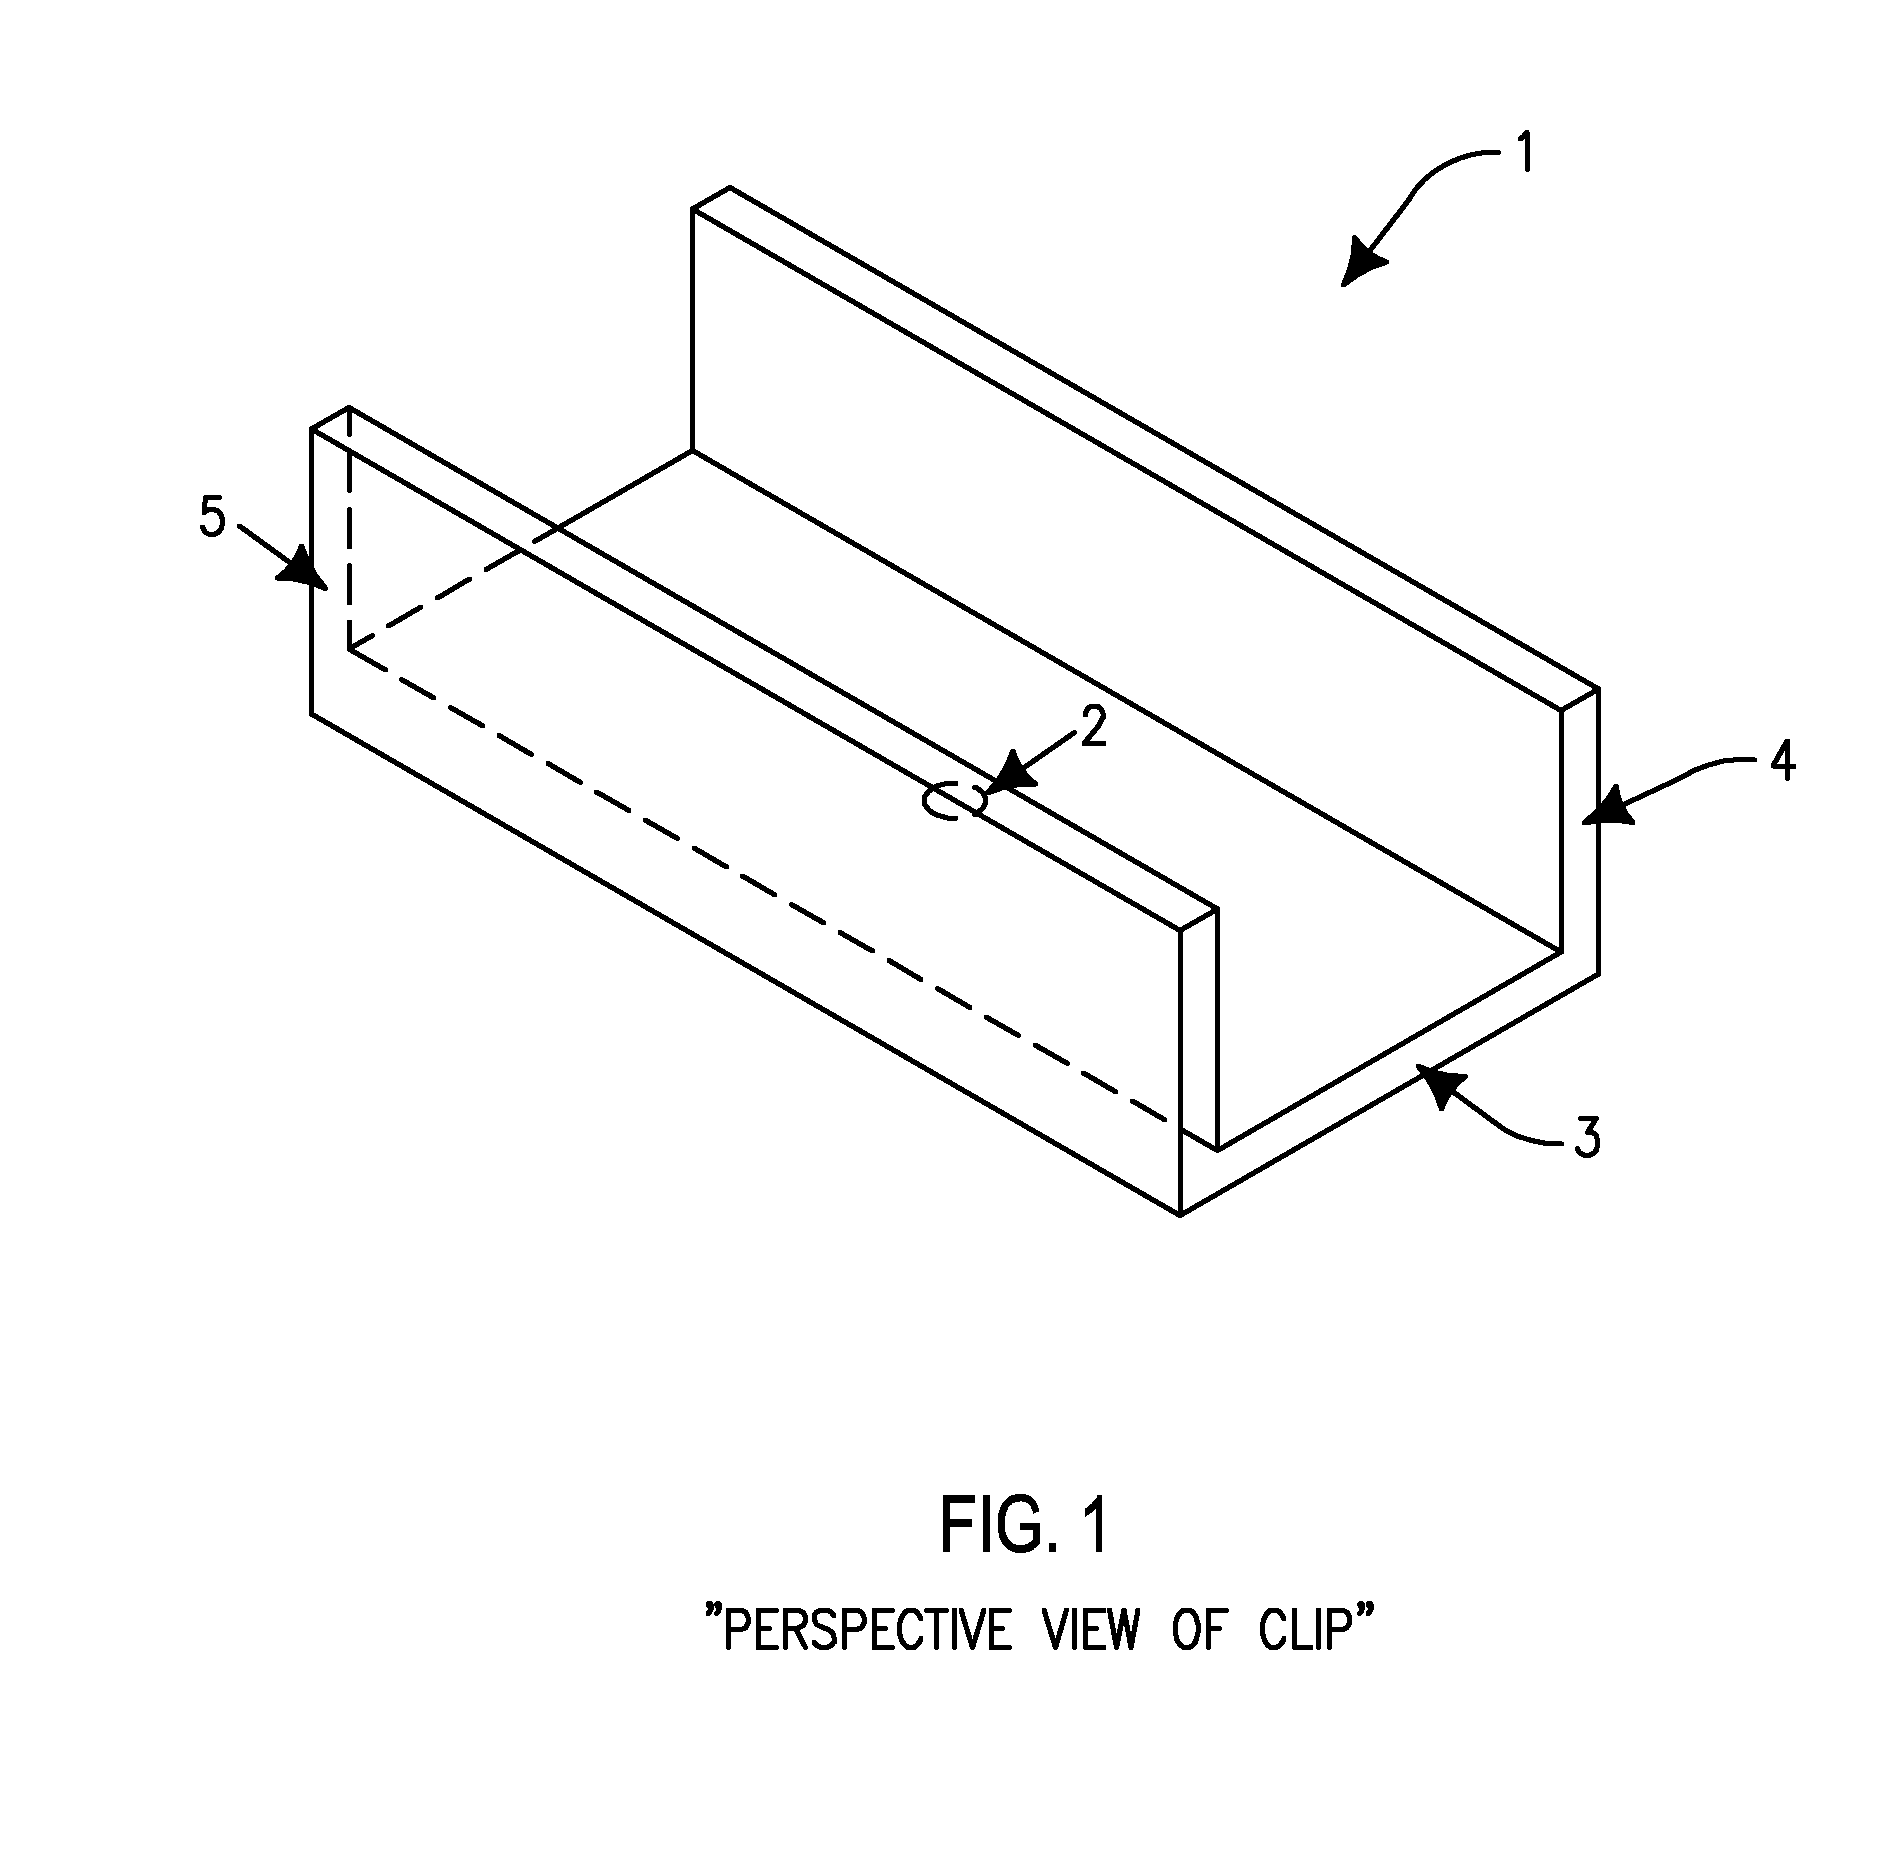 Window installation assembly and method to install windows